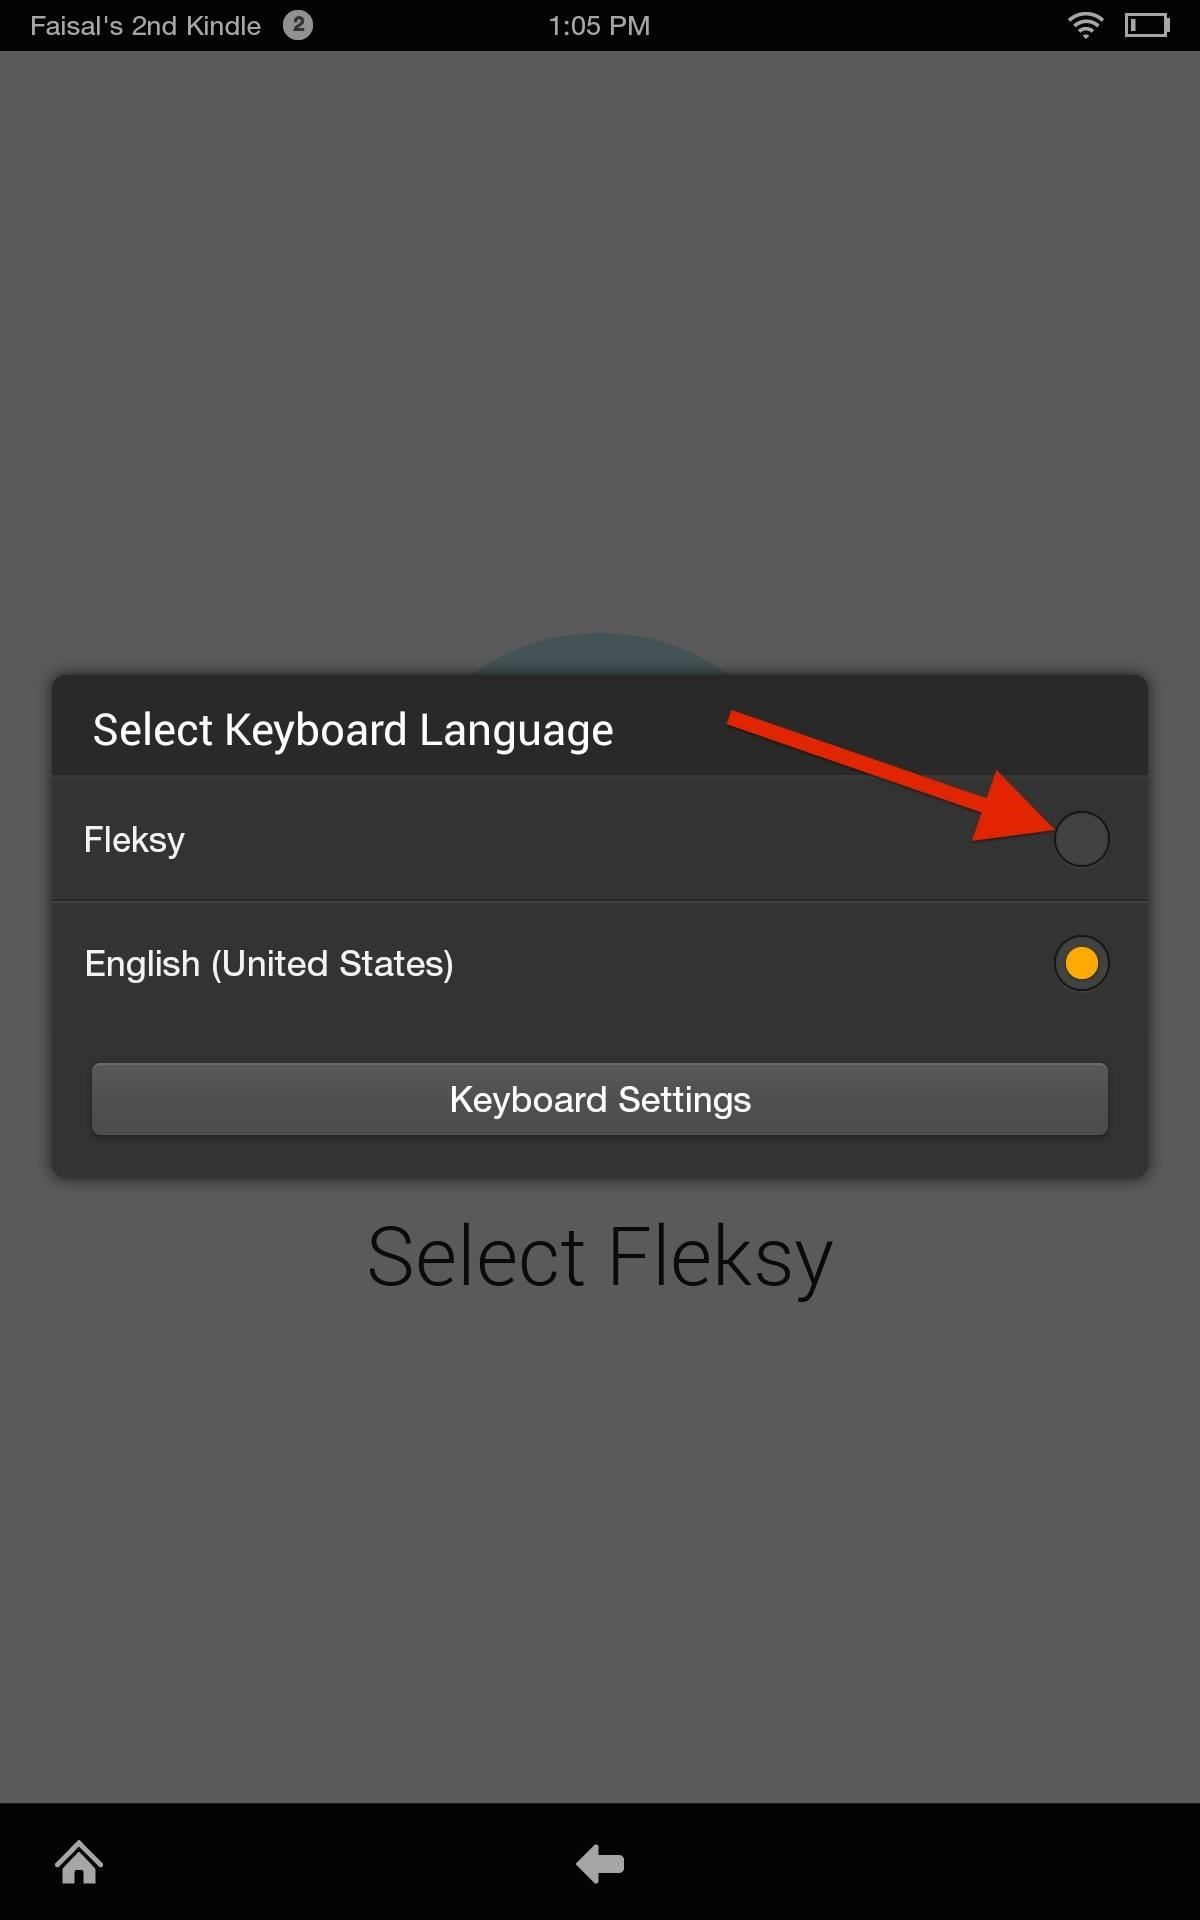 How to Install a Third-Party Keyboard on Your Amazon Kindle Fire HDX